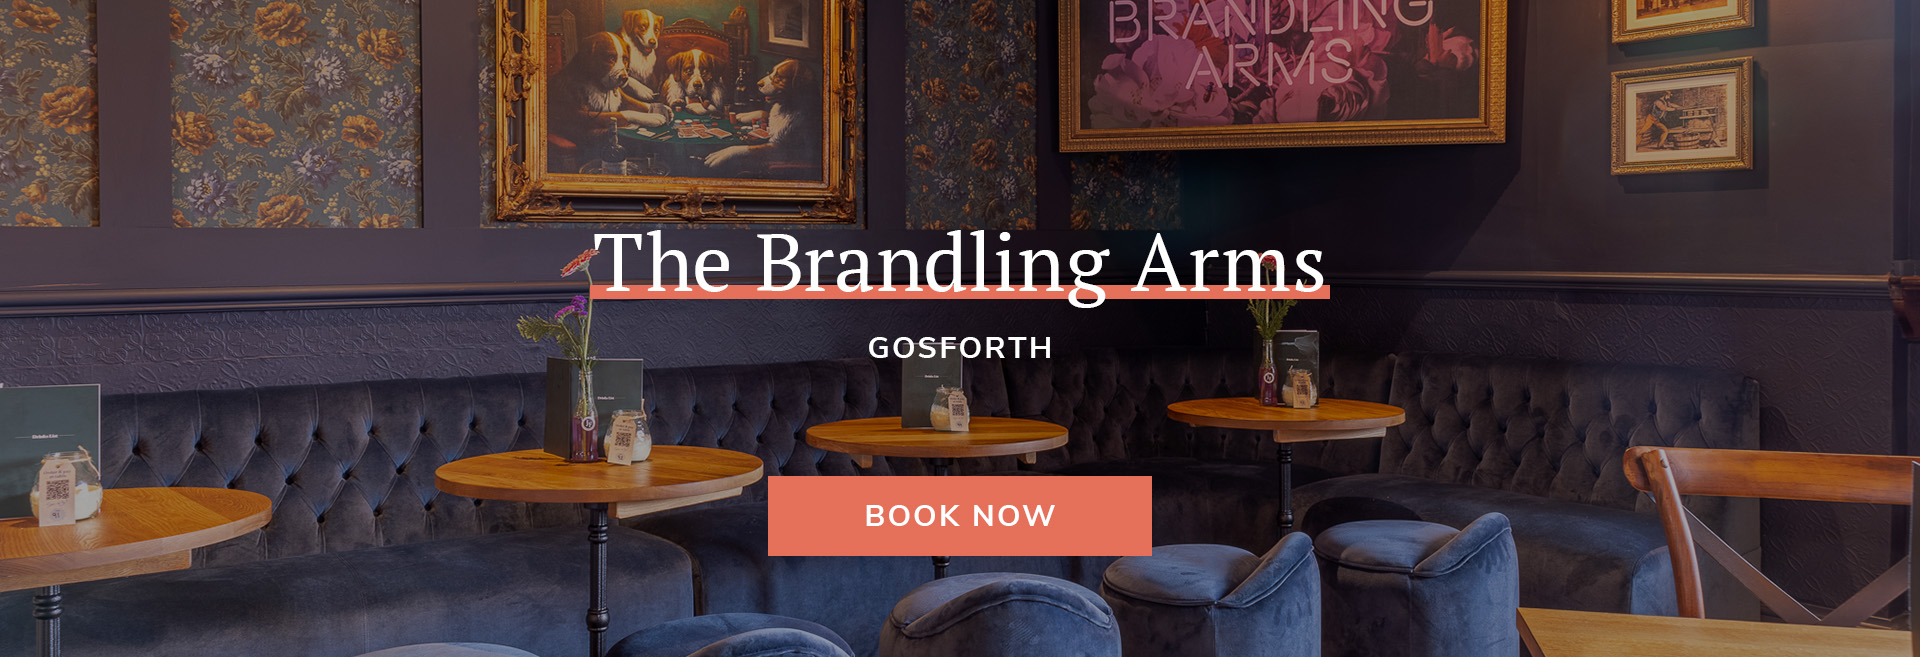 The Brandling Arms Banner 3